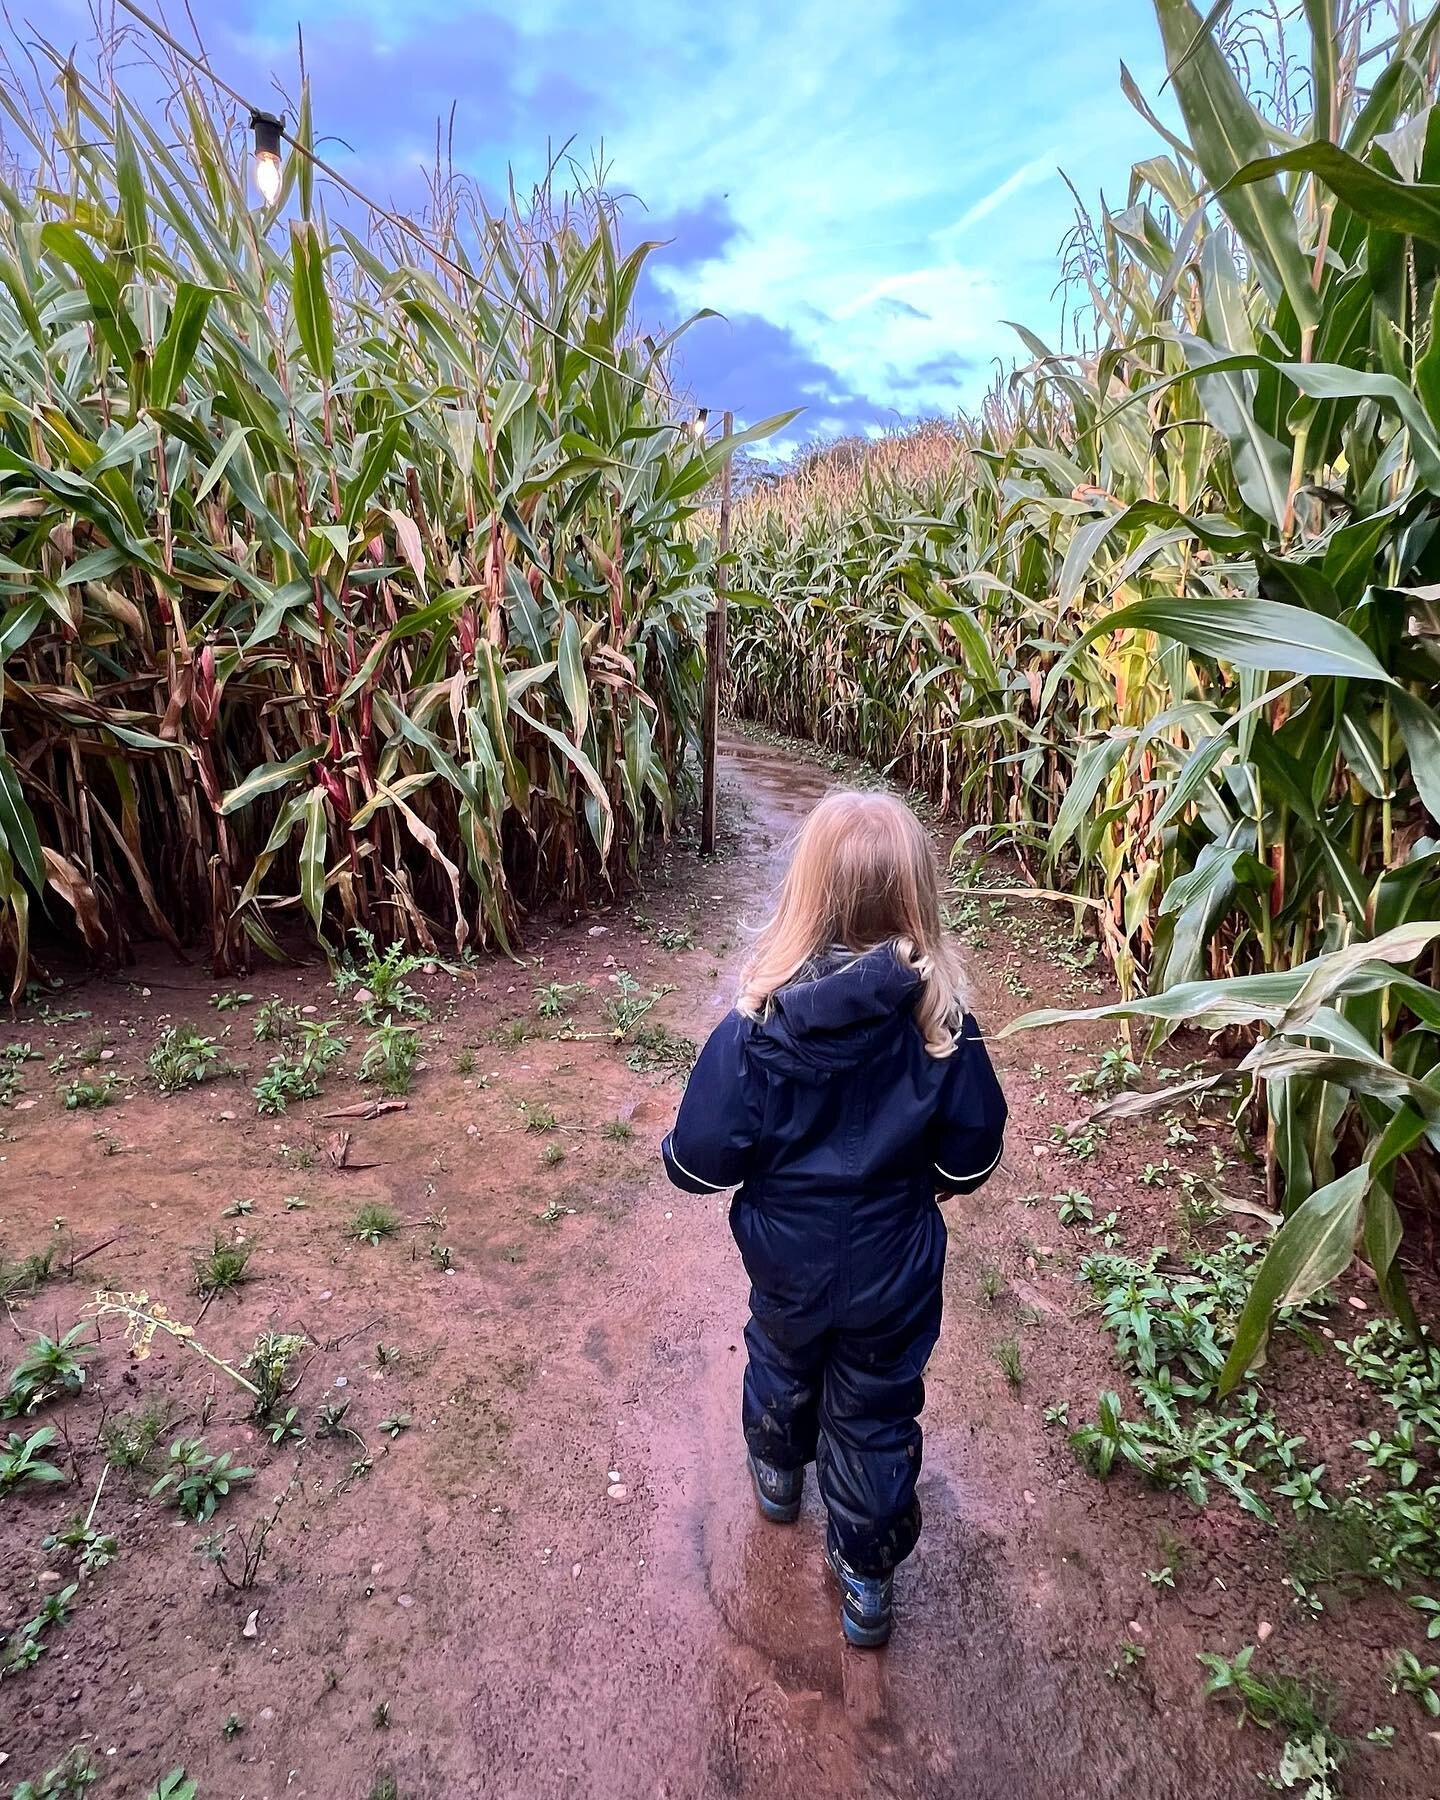 💡 Following the fairy light trail through the maze&hellip;.

👉🏼 Finding Gourds &amp; Gruesome ingredients for Wanda&rsquo;s Cauldron&hellip;

🥾 Splashing in muddy puddles is all part of the fun here @maze__52, especially when you come in a onesie